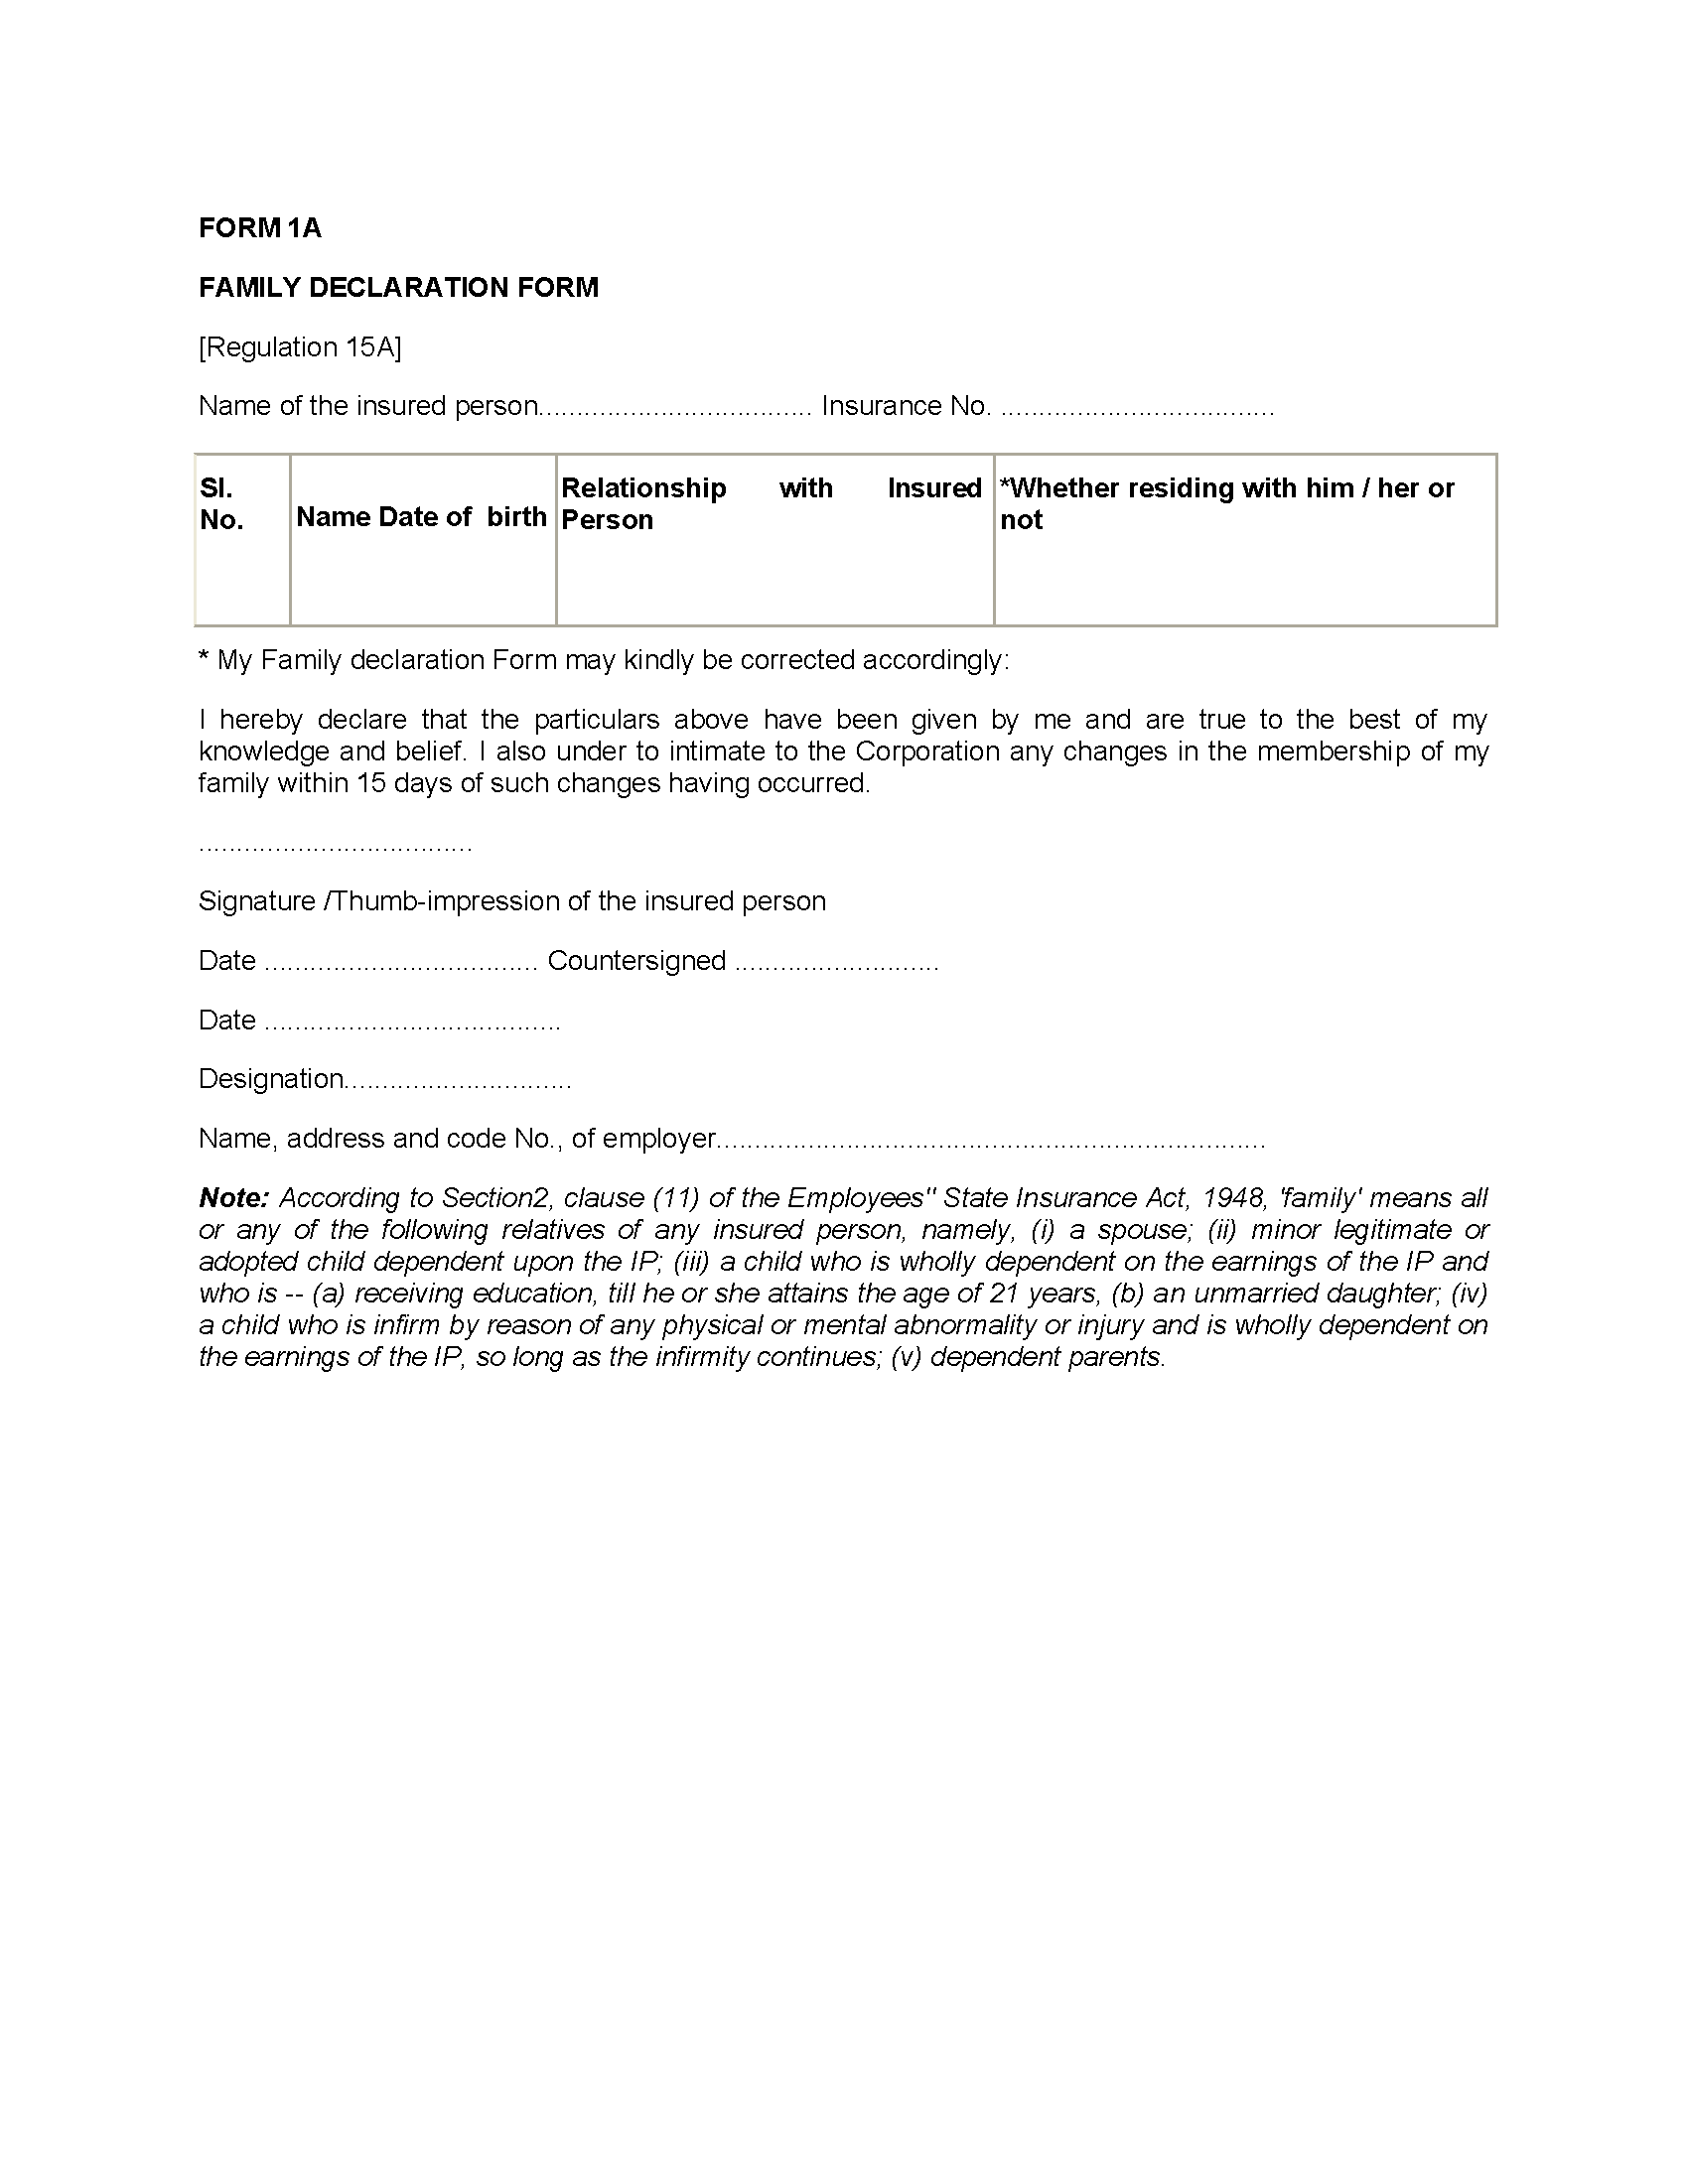 14 - FORM 1A - Family Declaration Form-converted